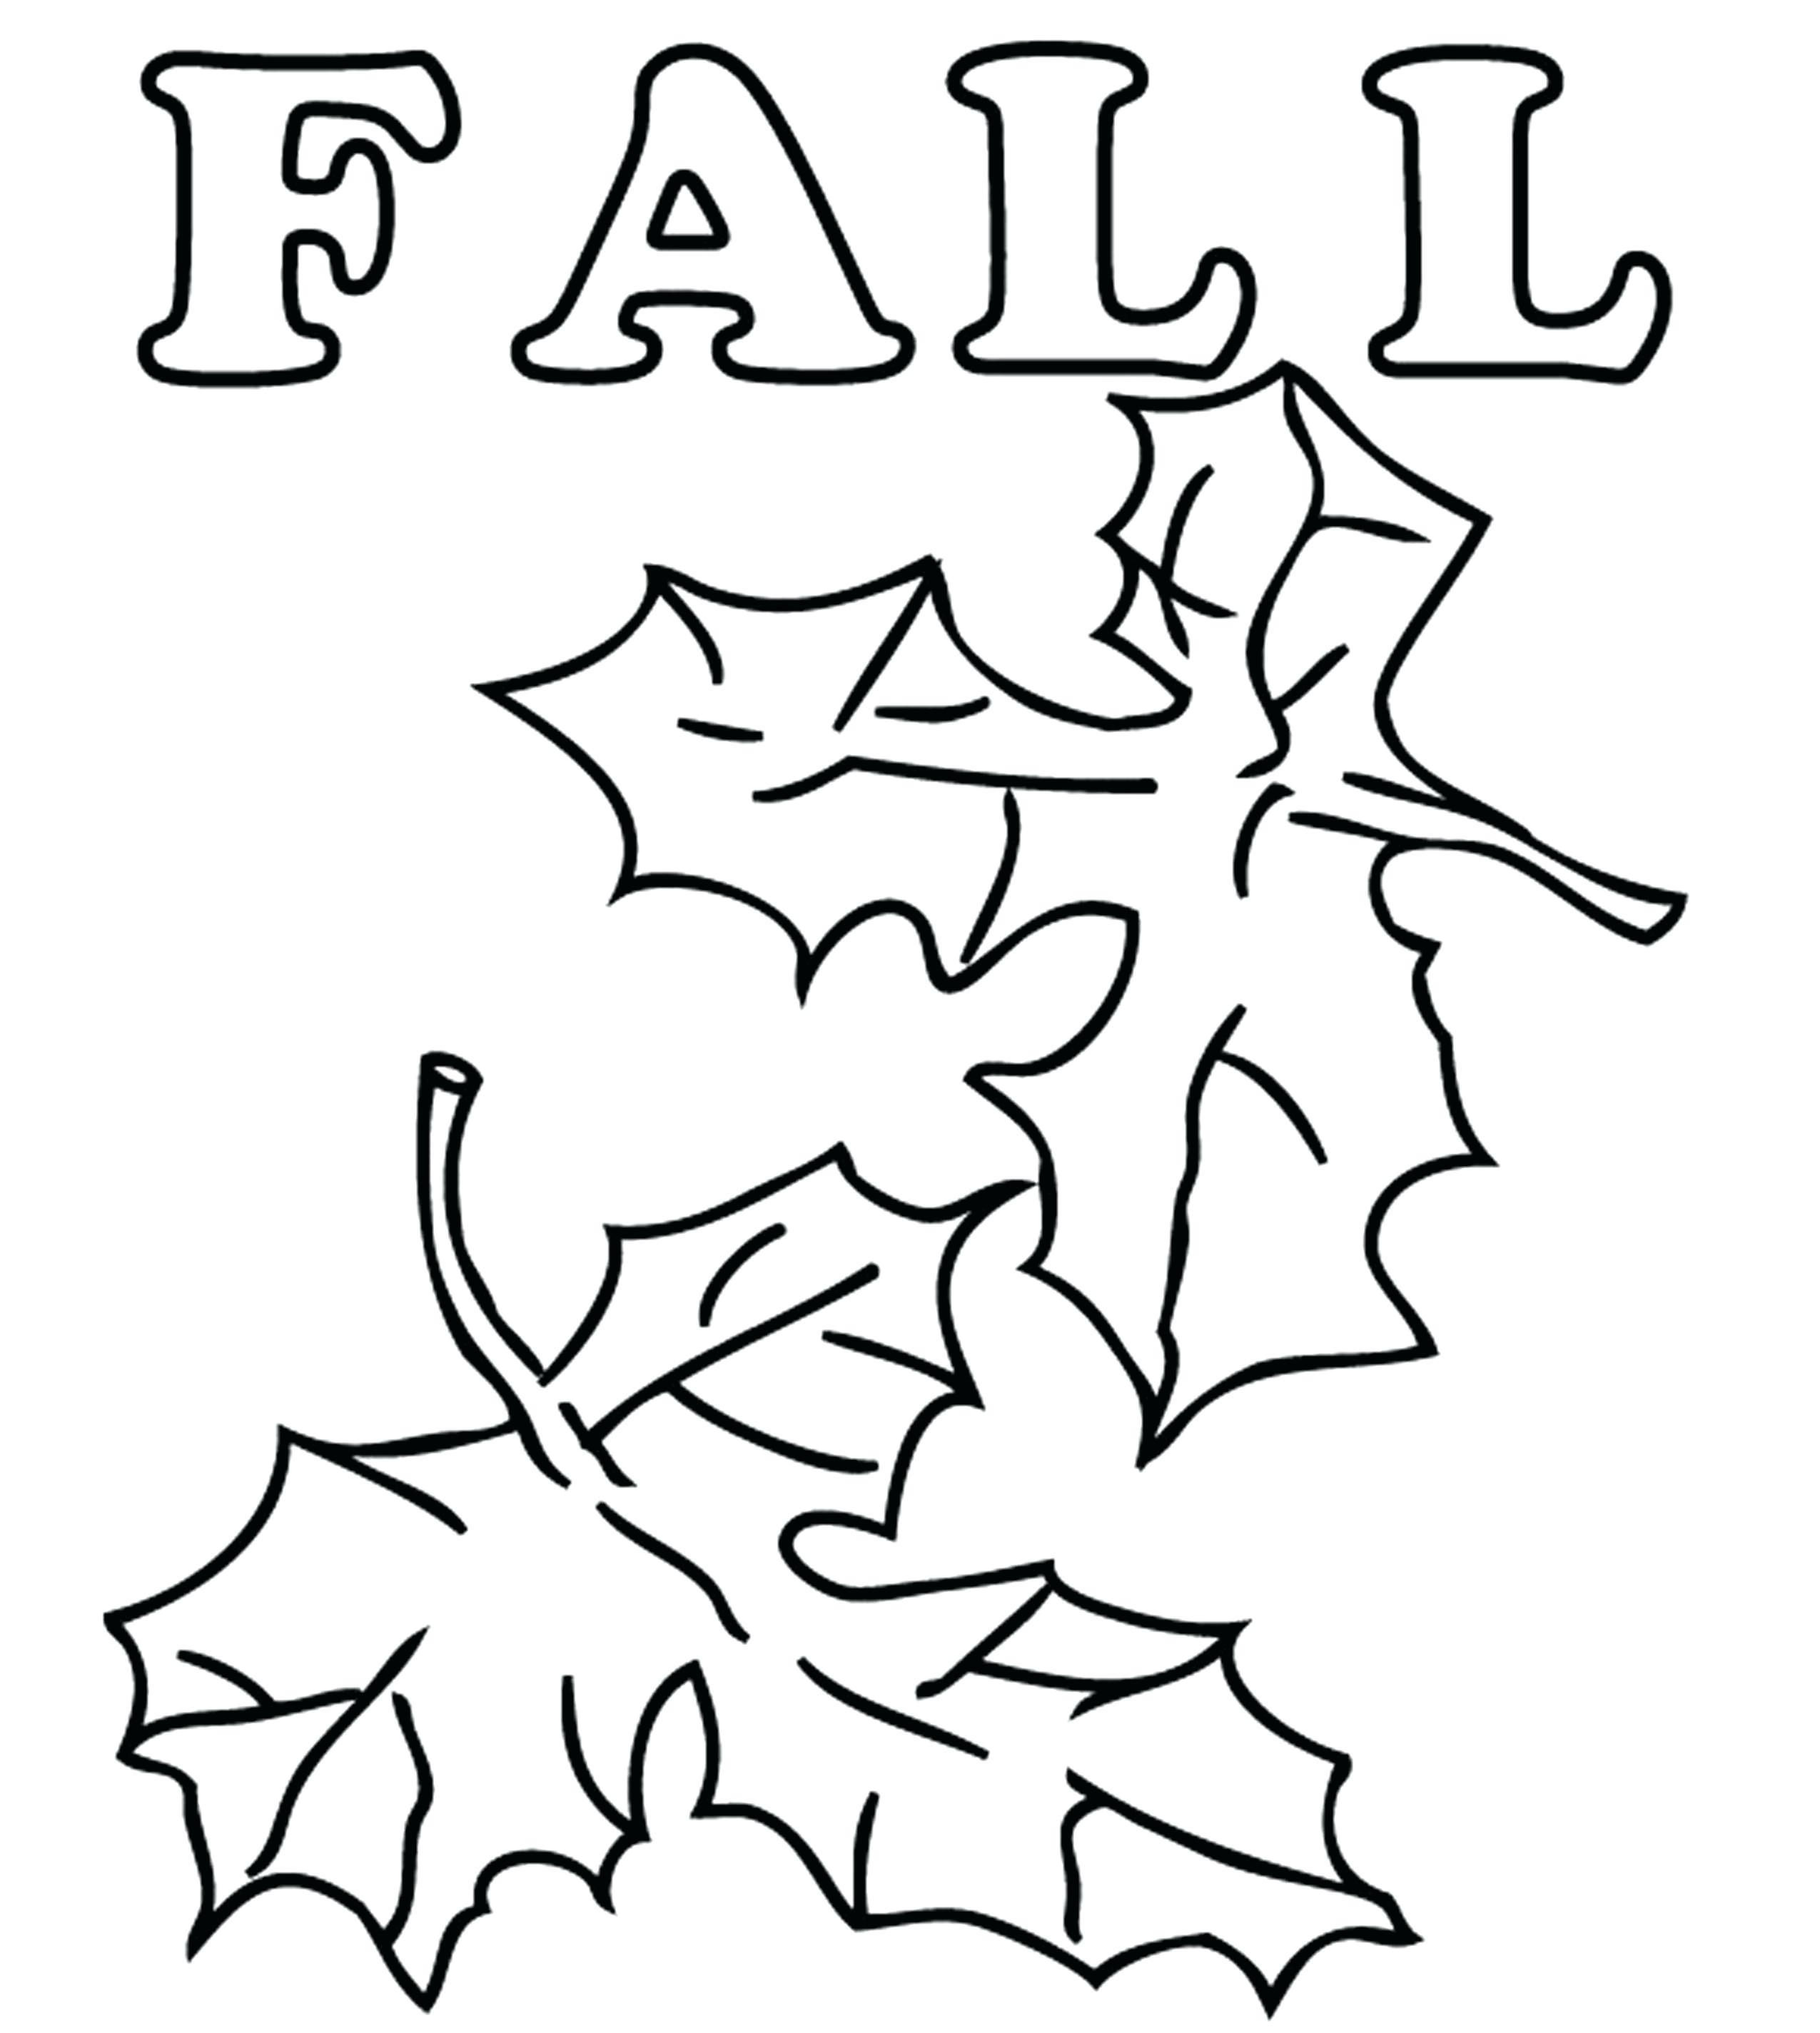 fall-leaves-coloring-pages-fall-coloring-sheets-leaf-coloring-page